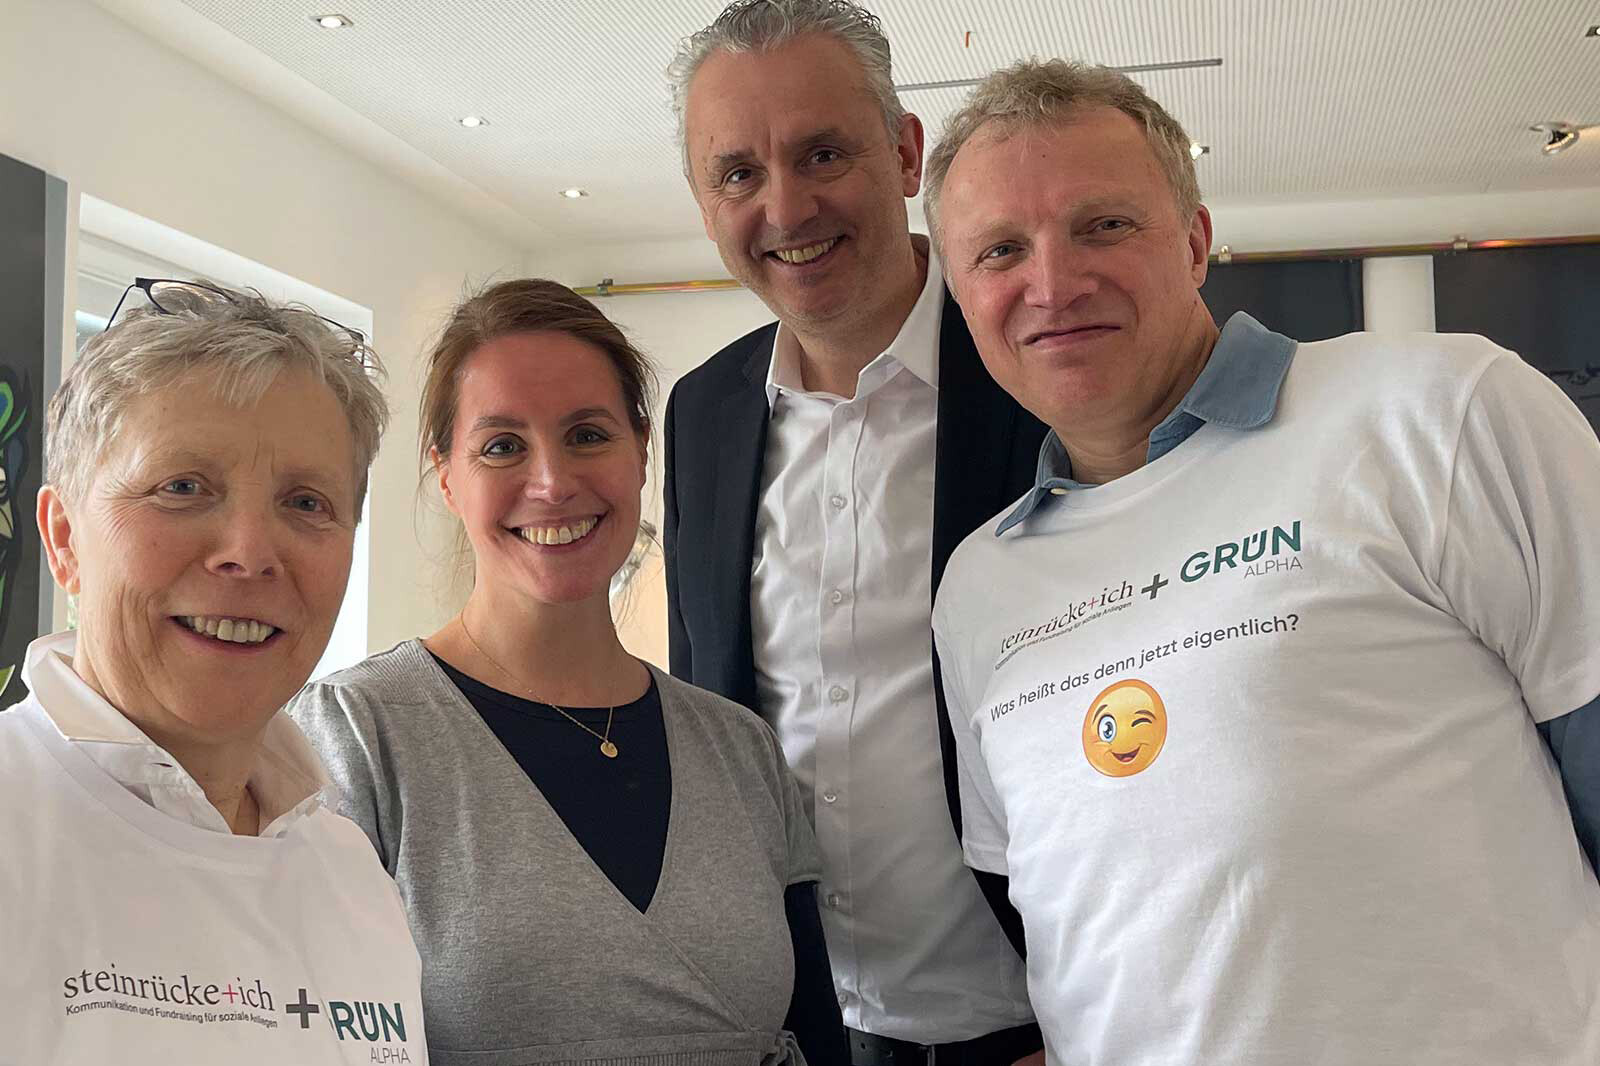 Veronika Steinrücke (left) and Ulrich Steinrücke (right), agency steinrücke + ich, are now walking together with Friederike Hofmann (2nd from left) and Joachim Sina (2nd from right) from the fundraising agency GRÜN alpha.